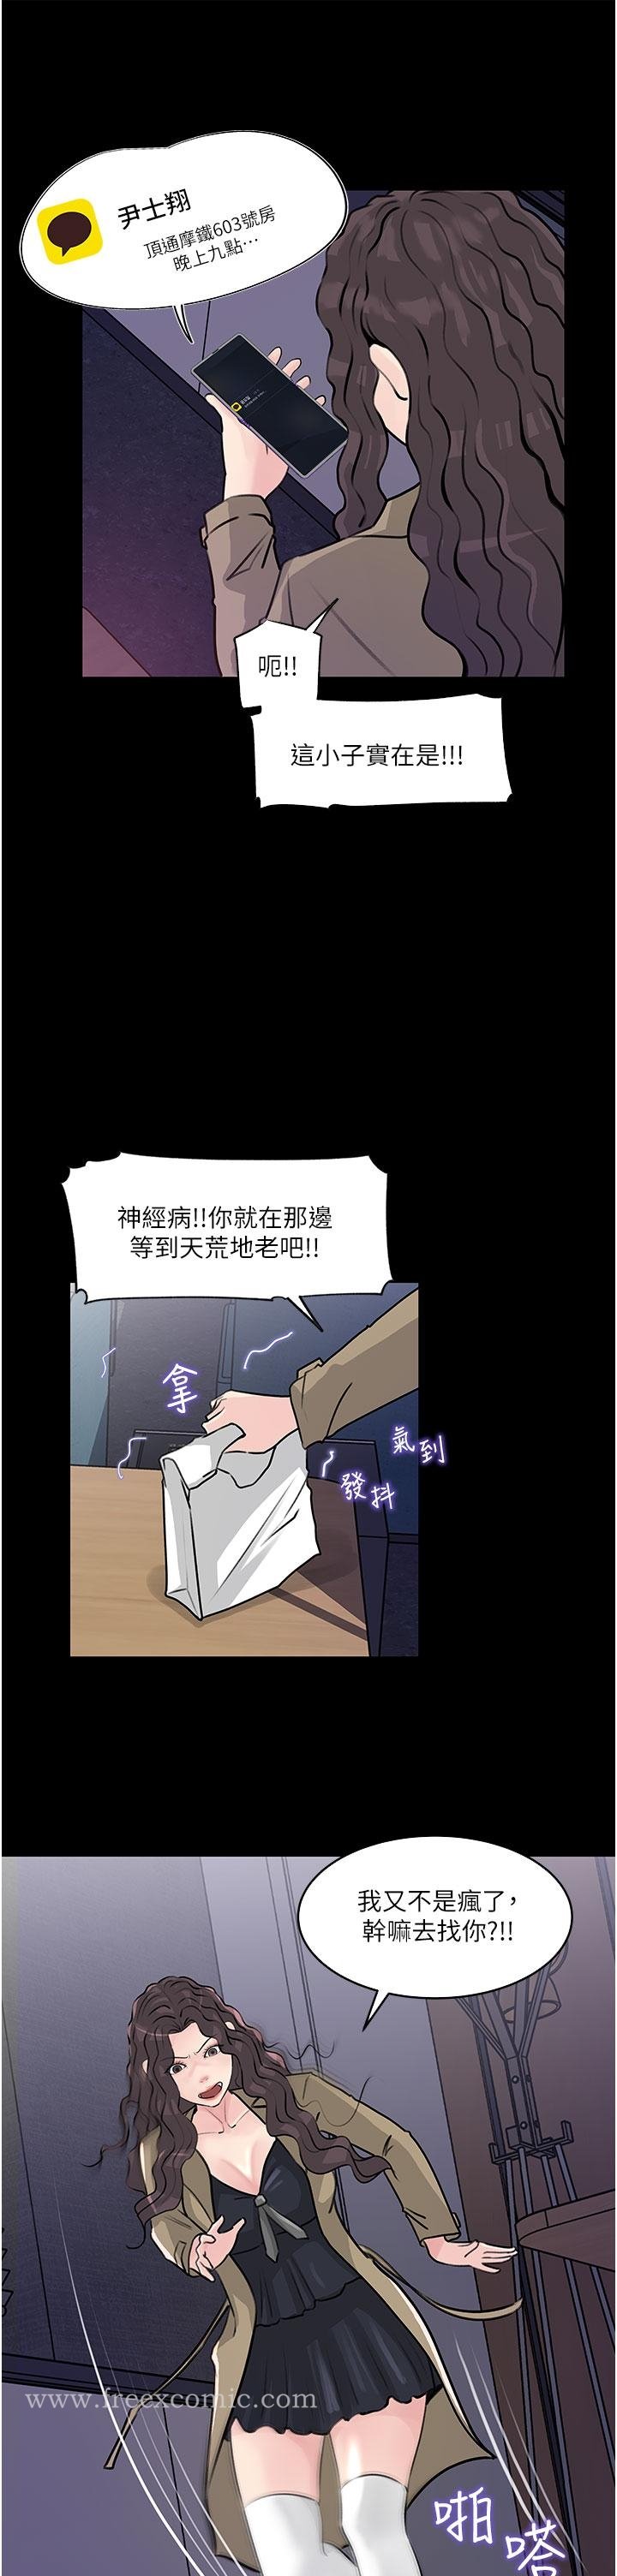 in-my-sister-in-law-raw-chap-31-33